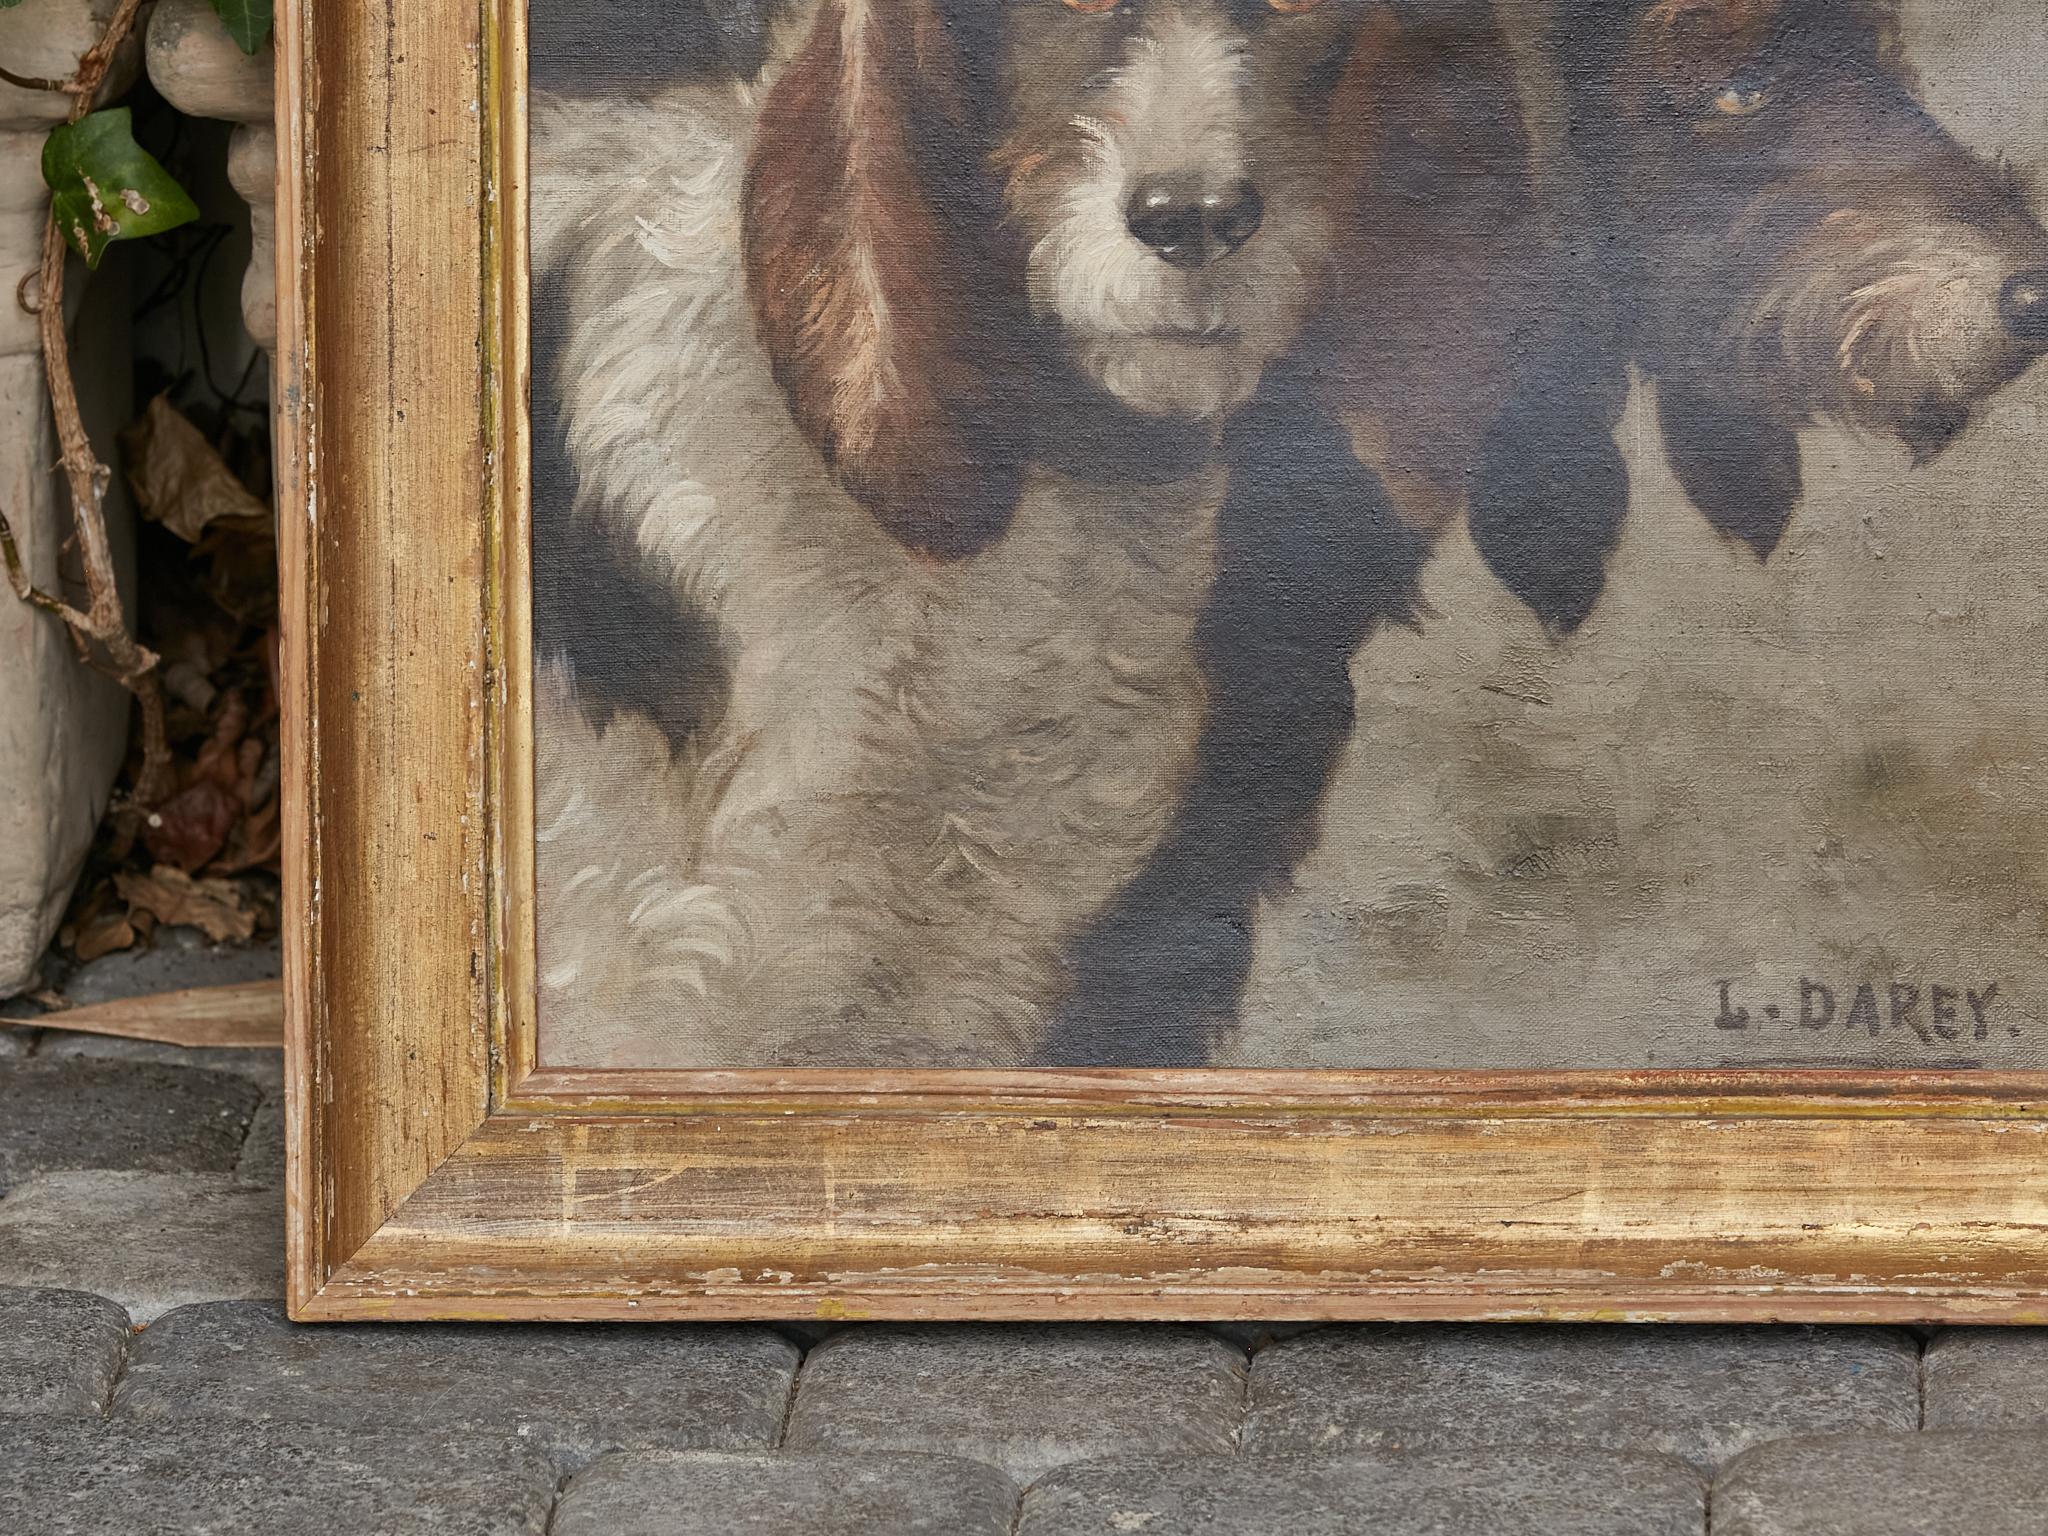 Canvas Portrait of a Pair of Bassets Hunting Dogs by Louis Darey in Gilded Frame, 1880s